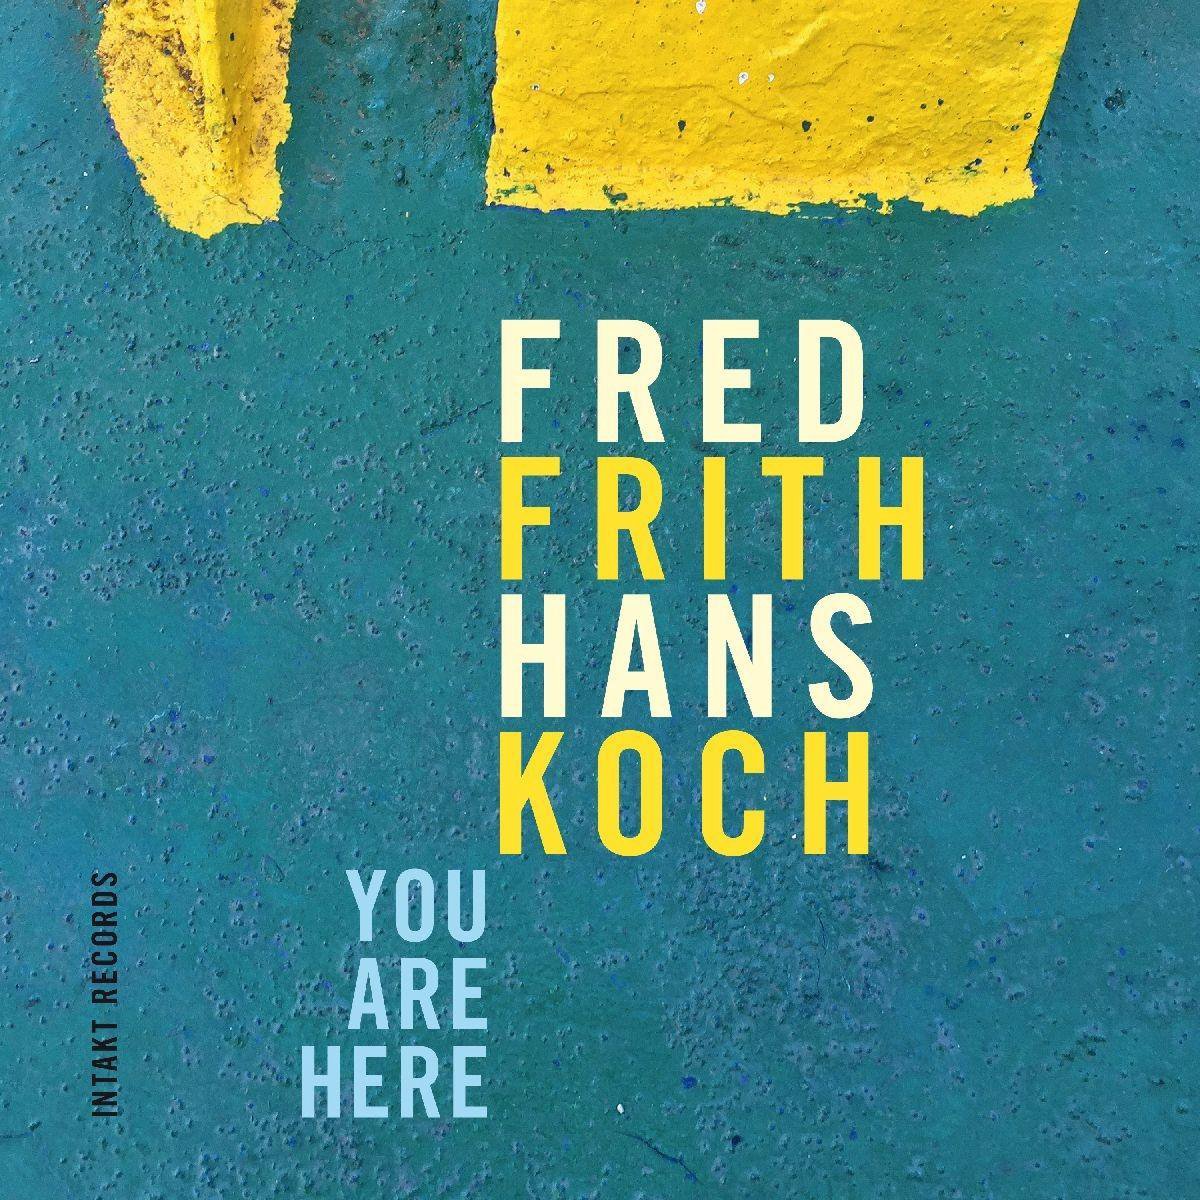 Frith/Koch: You are here